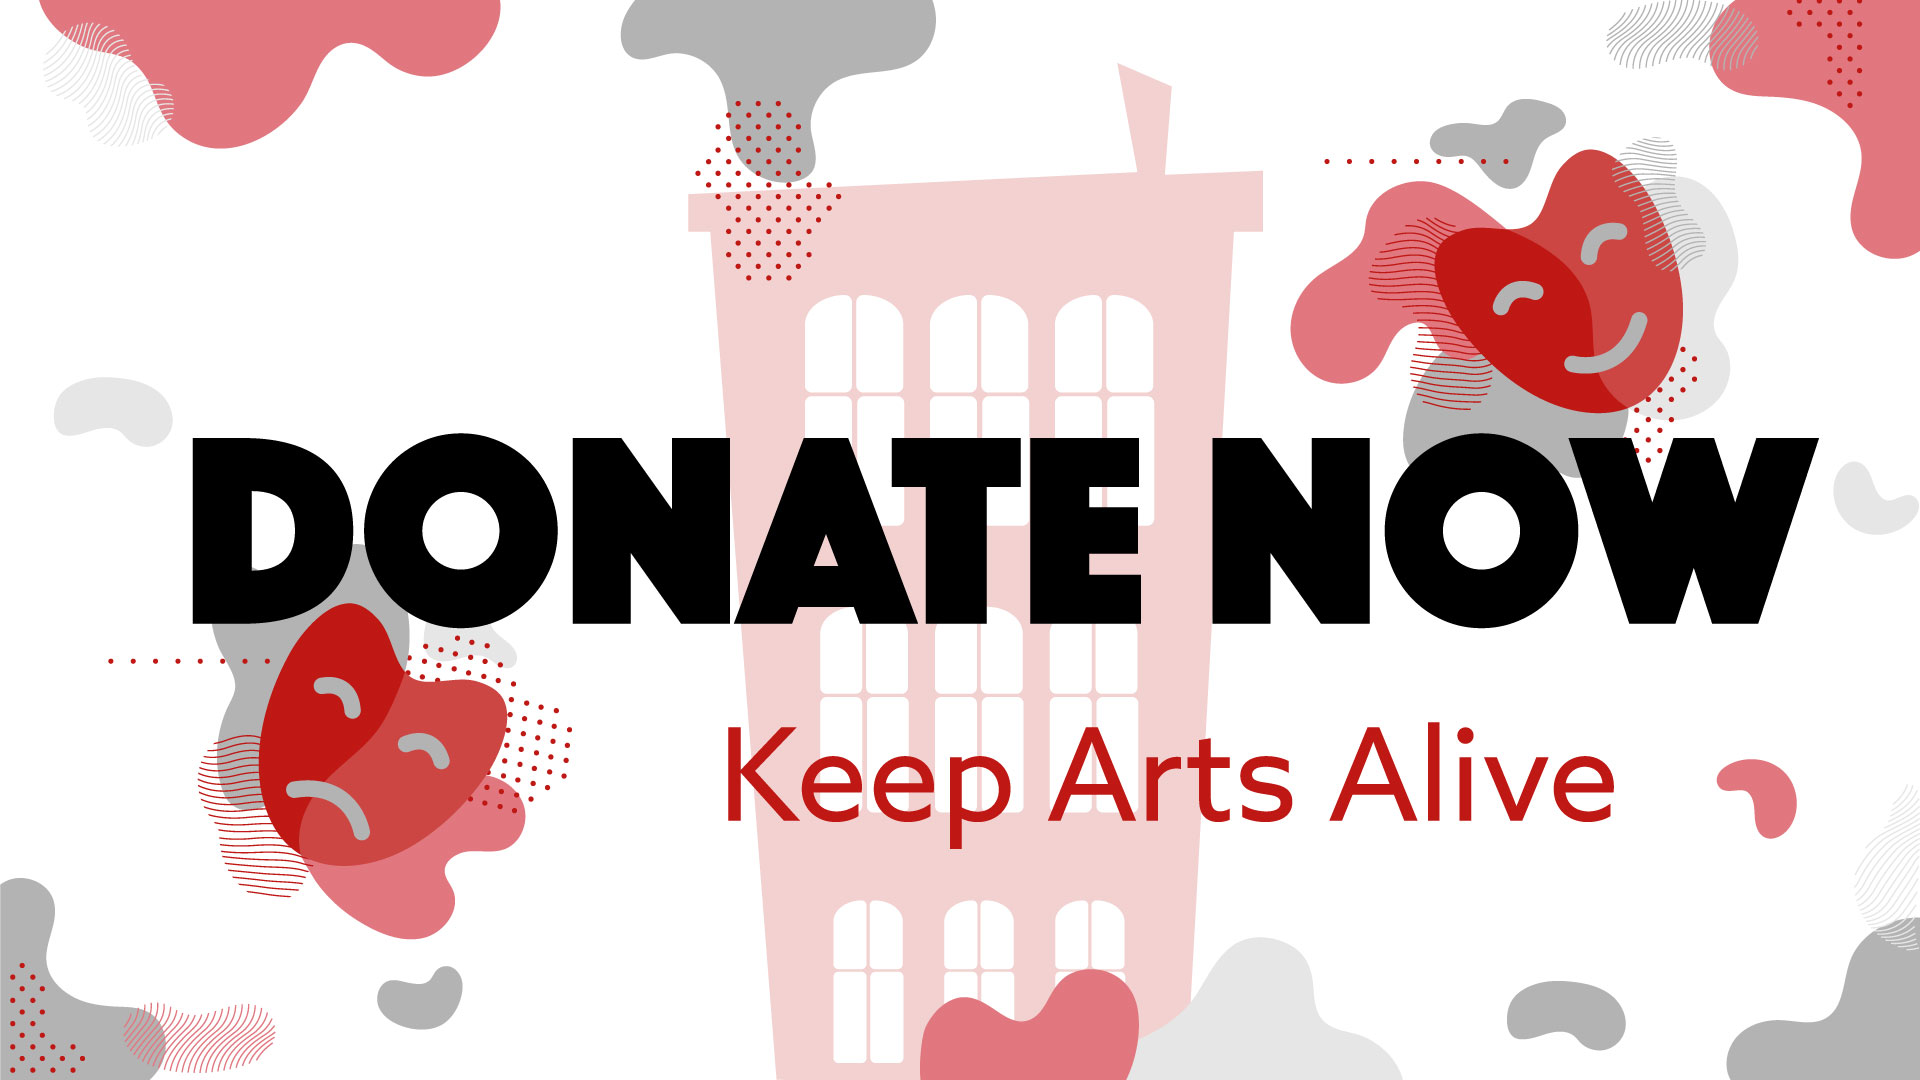 Show Details: Donate Now. Keep Arts Alive.